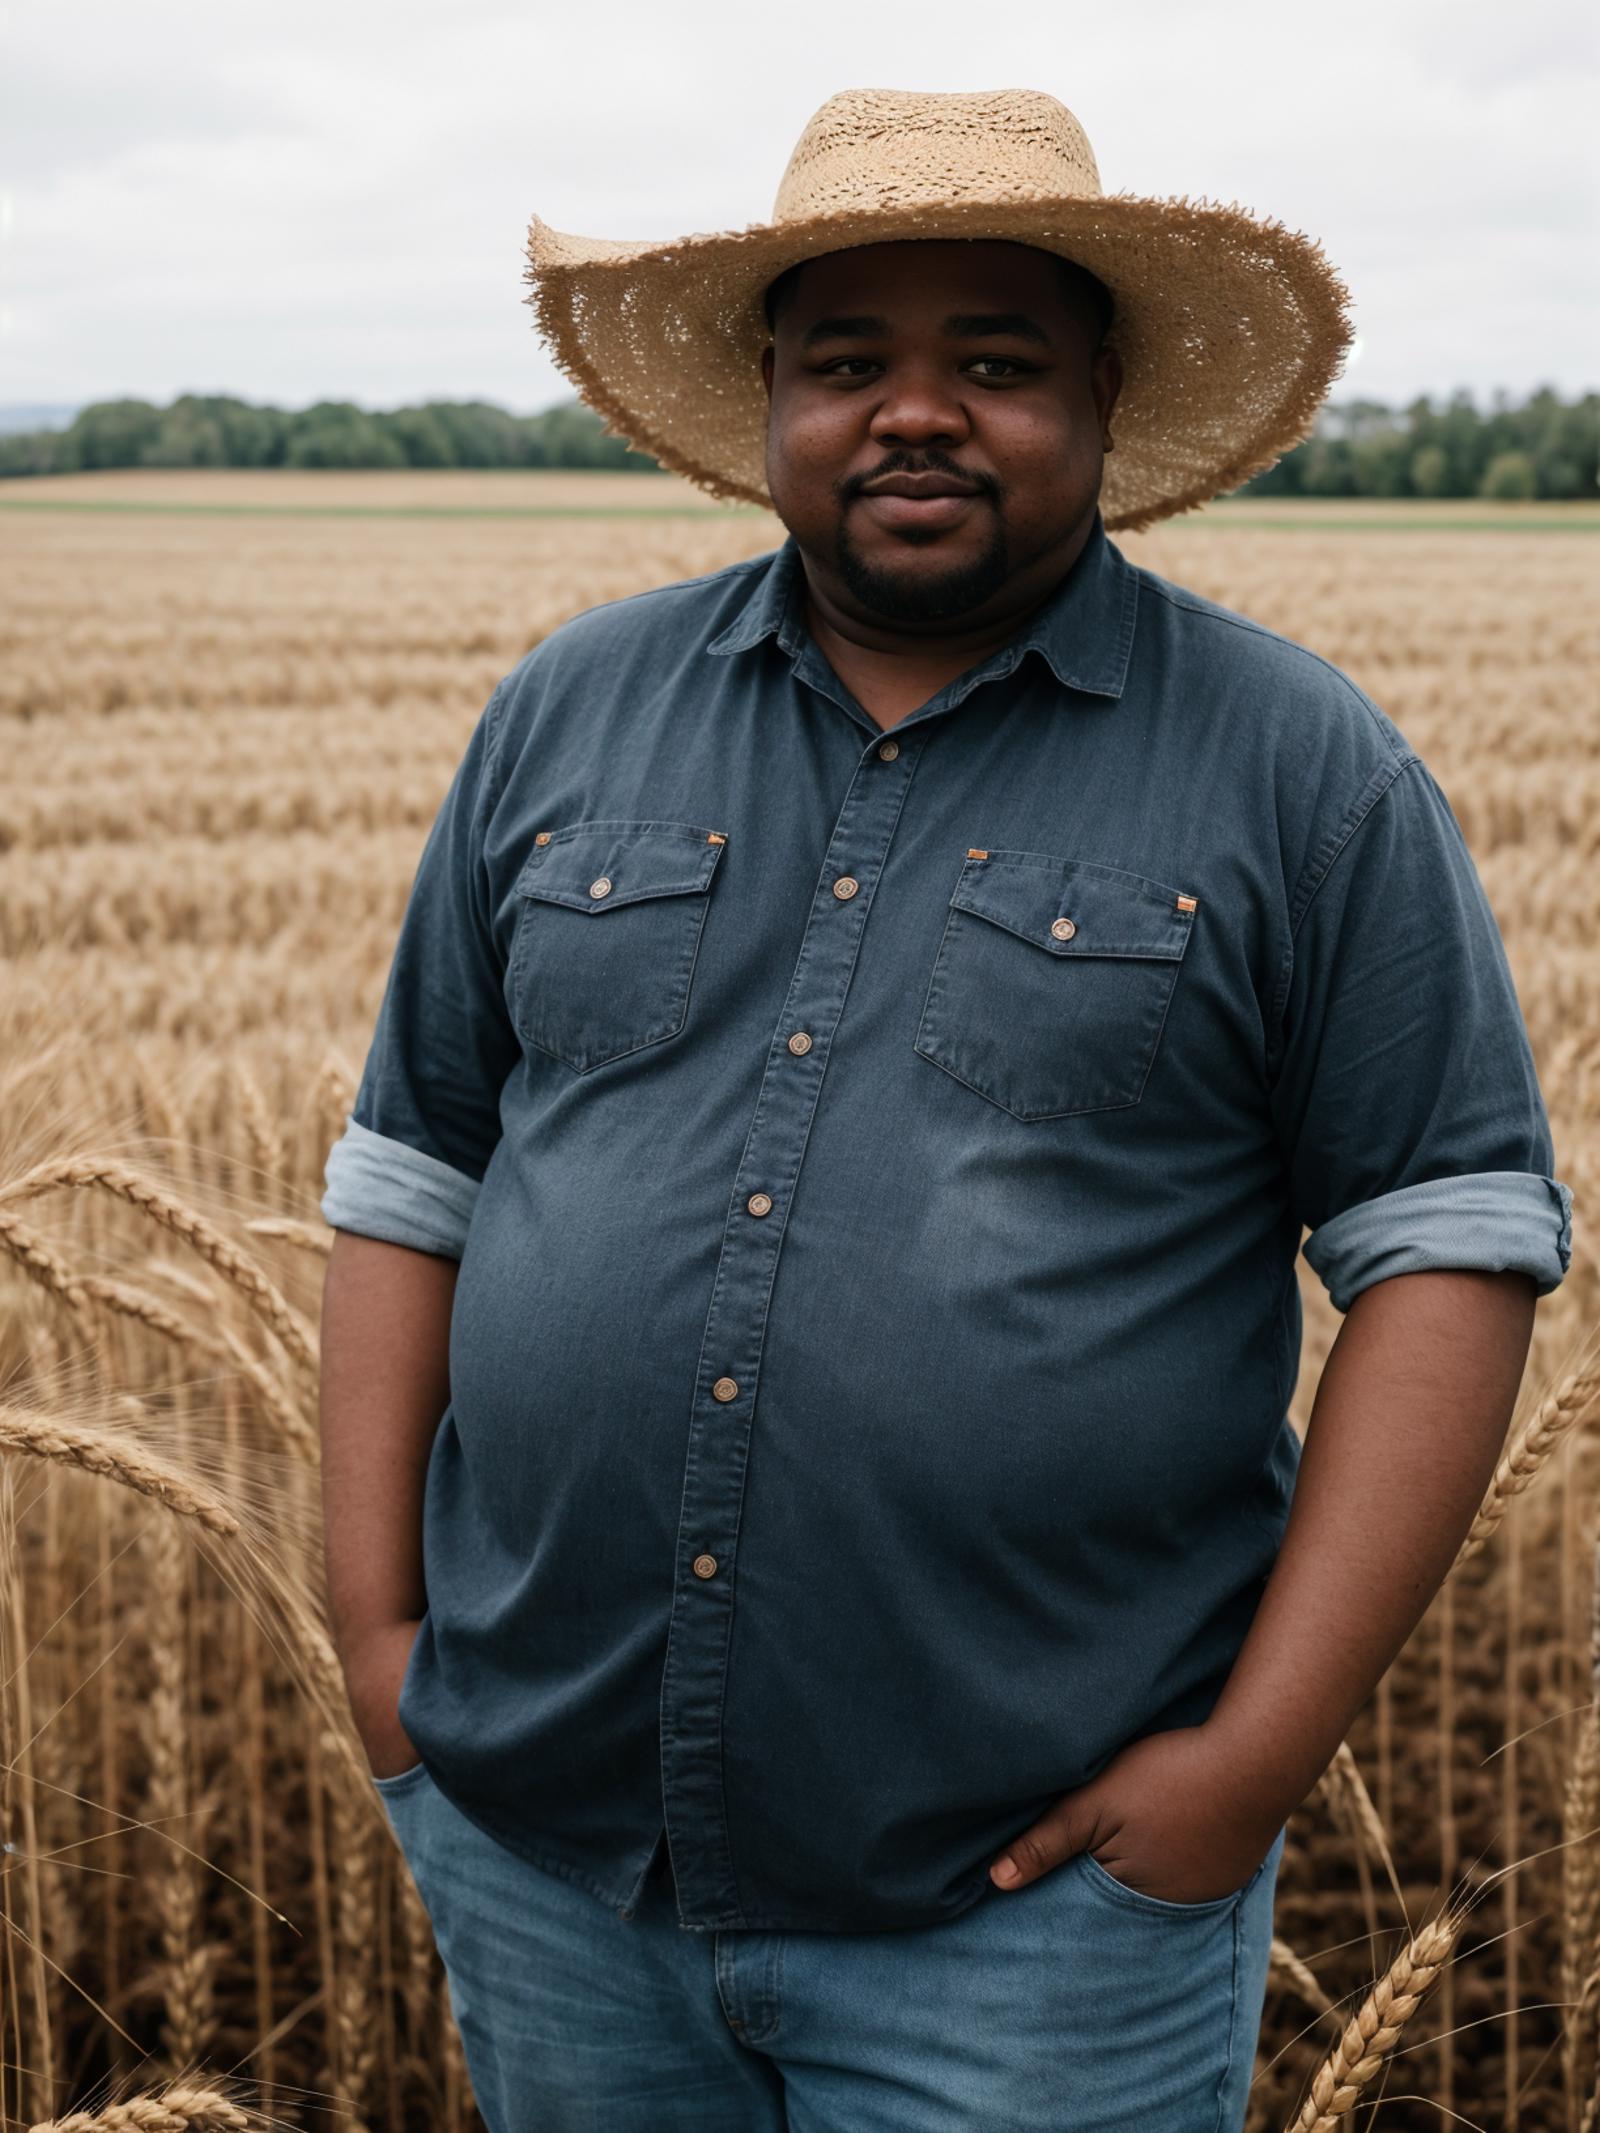 A man wearing a straw hat and a blue shirt standing in a field of wheat.